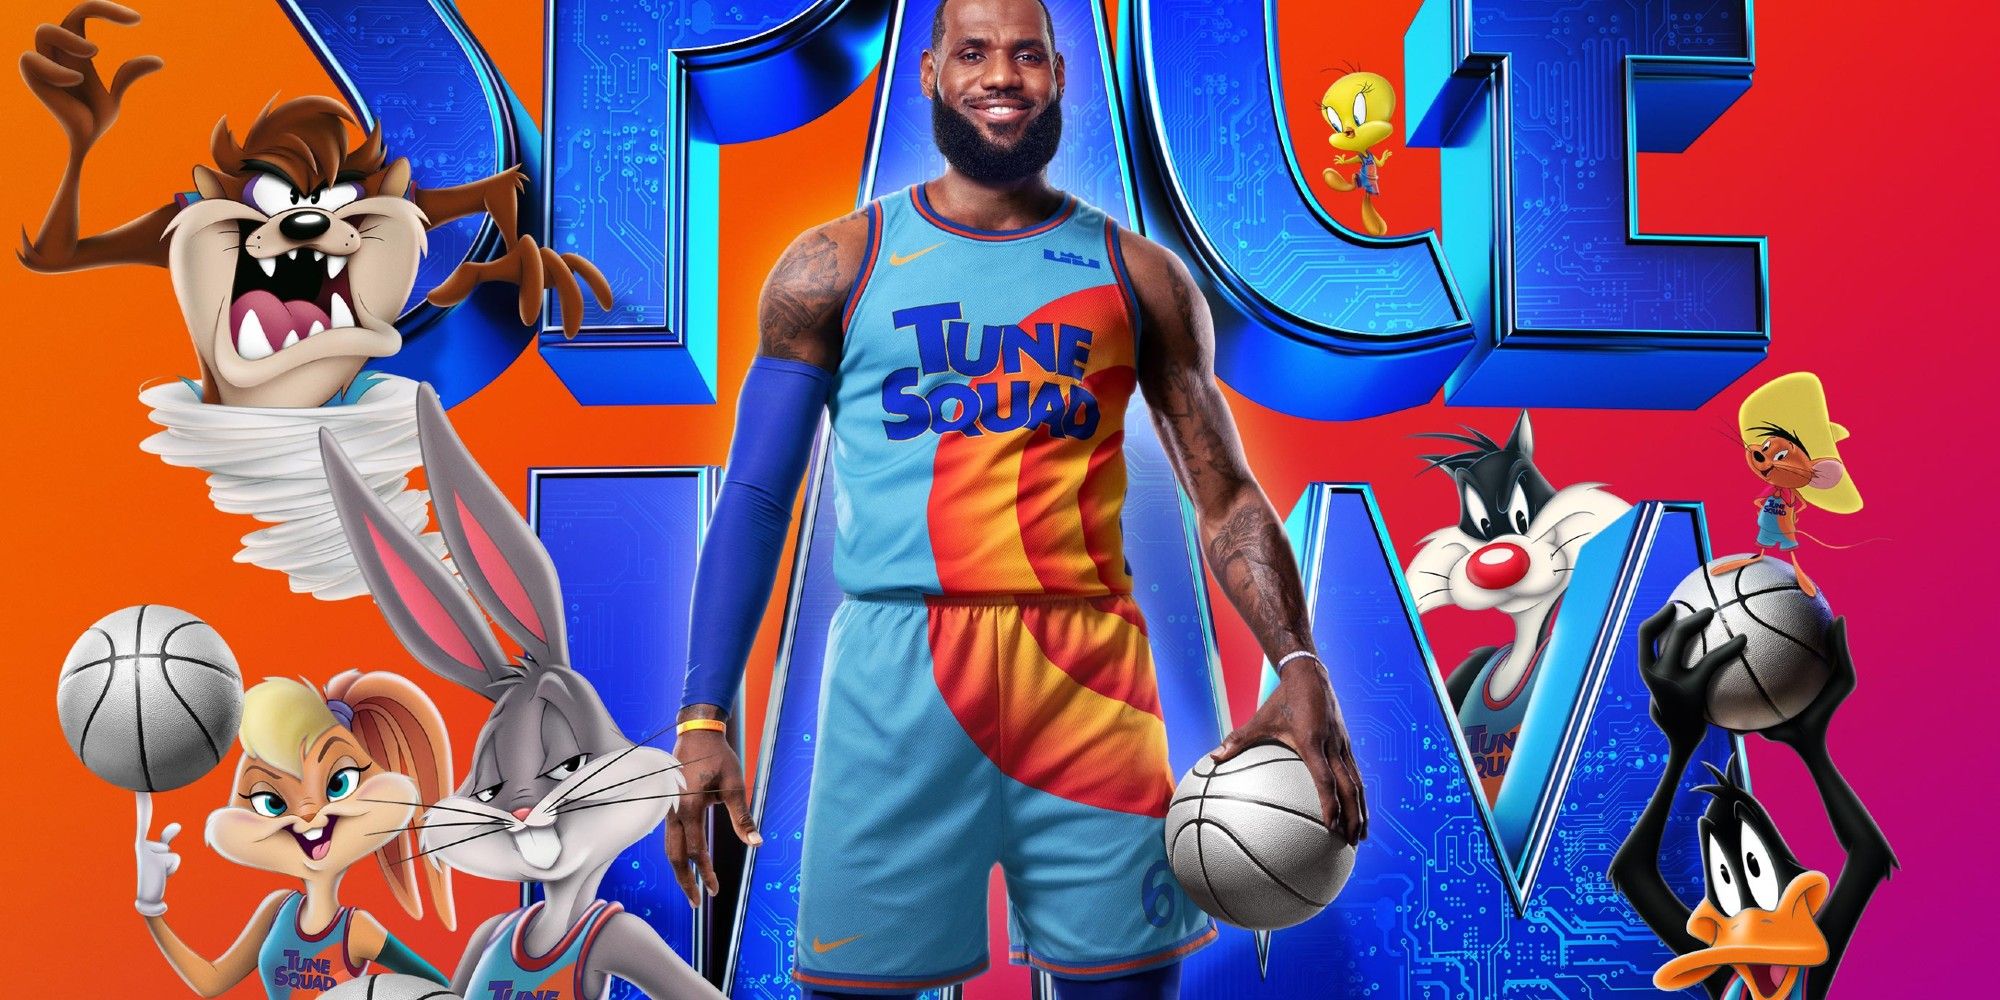 Space Jam 2's New Poster Highlights The Tune Squad